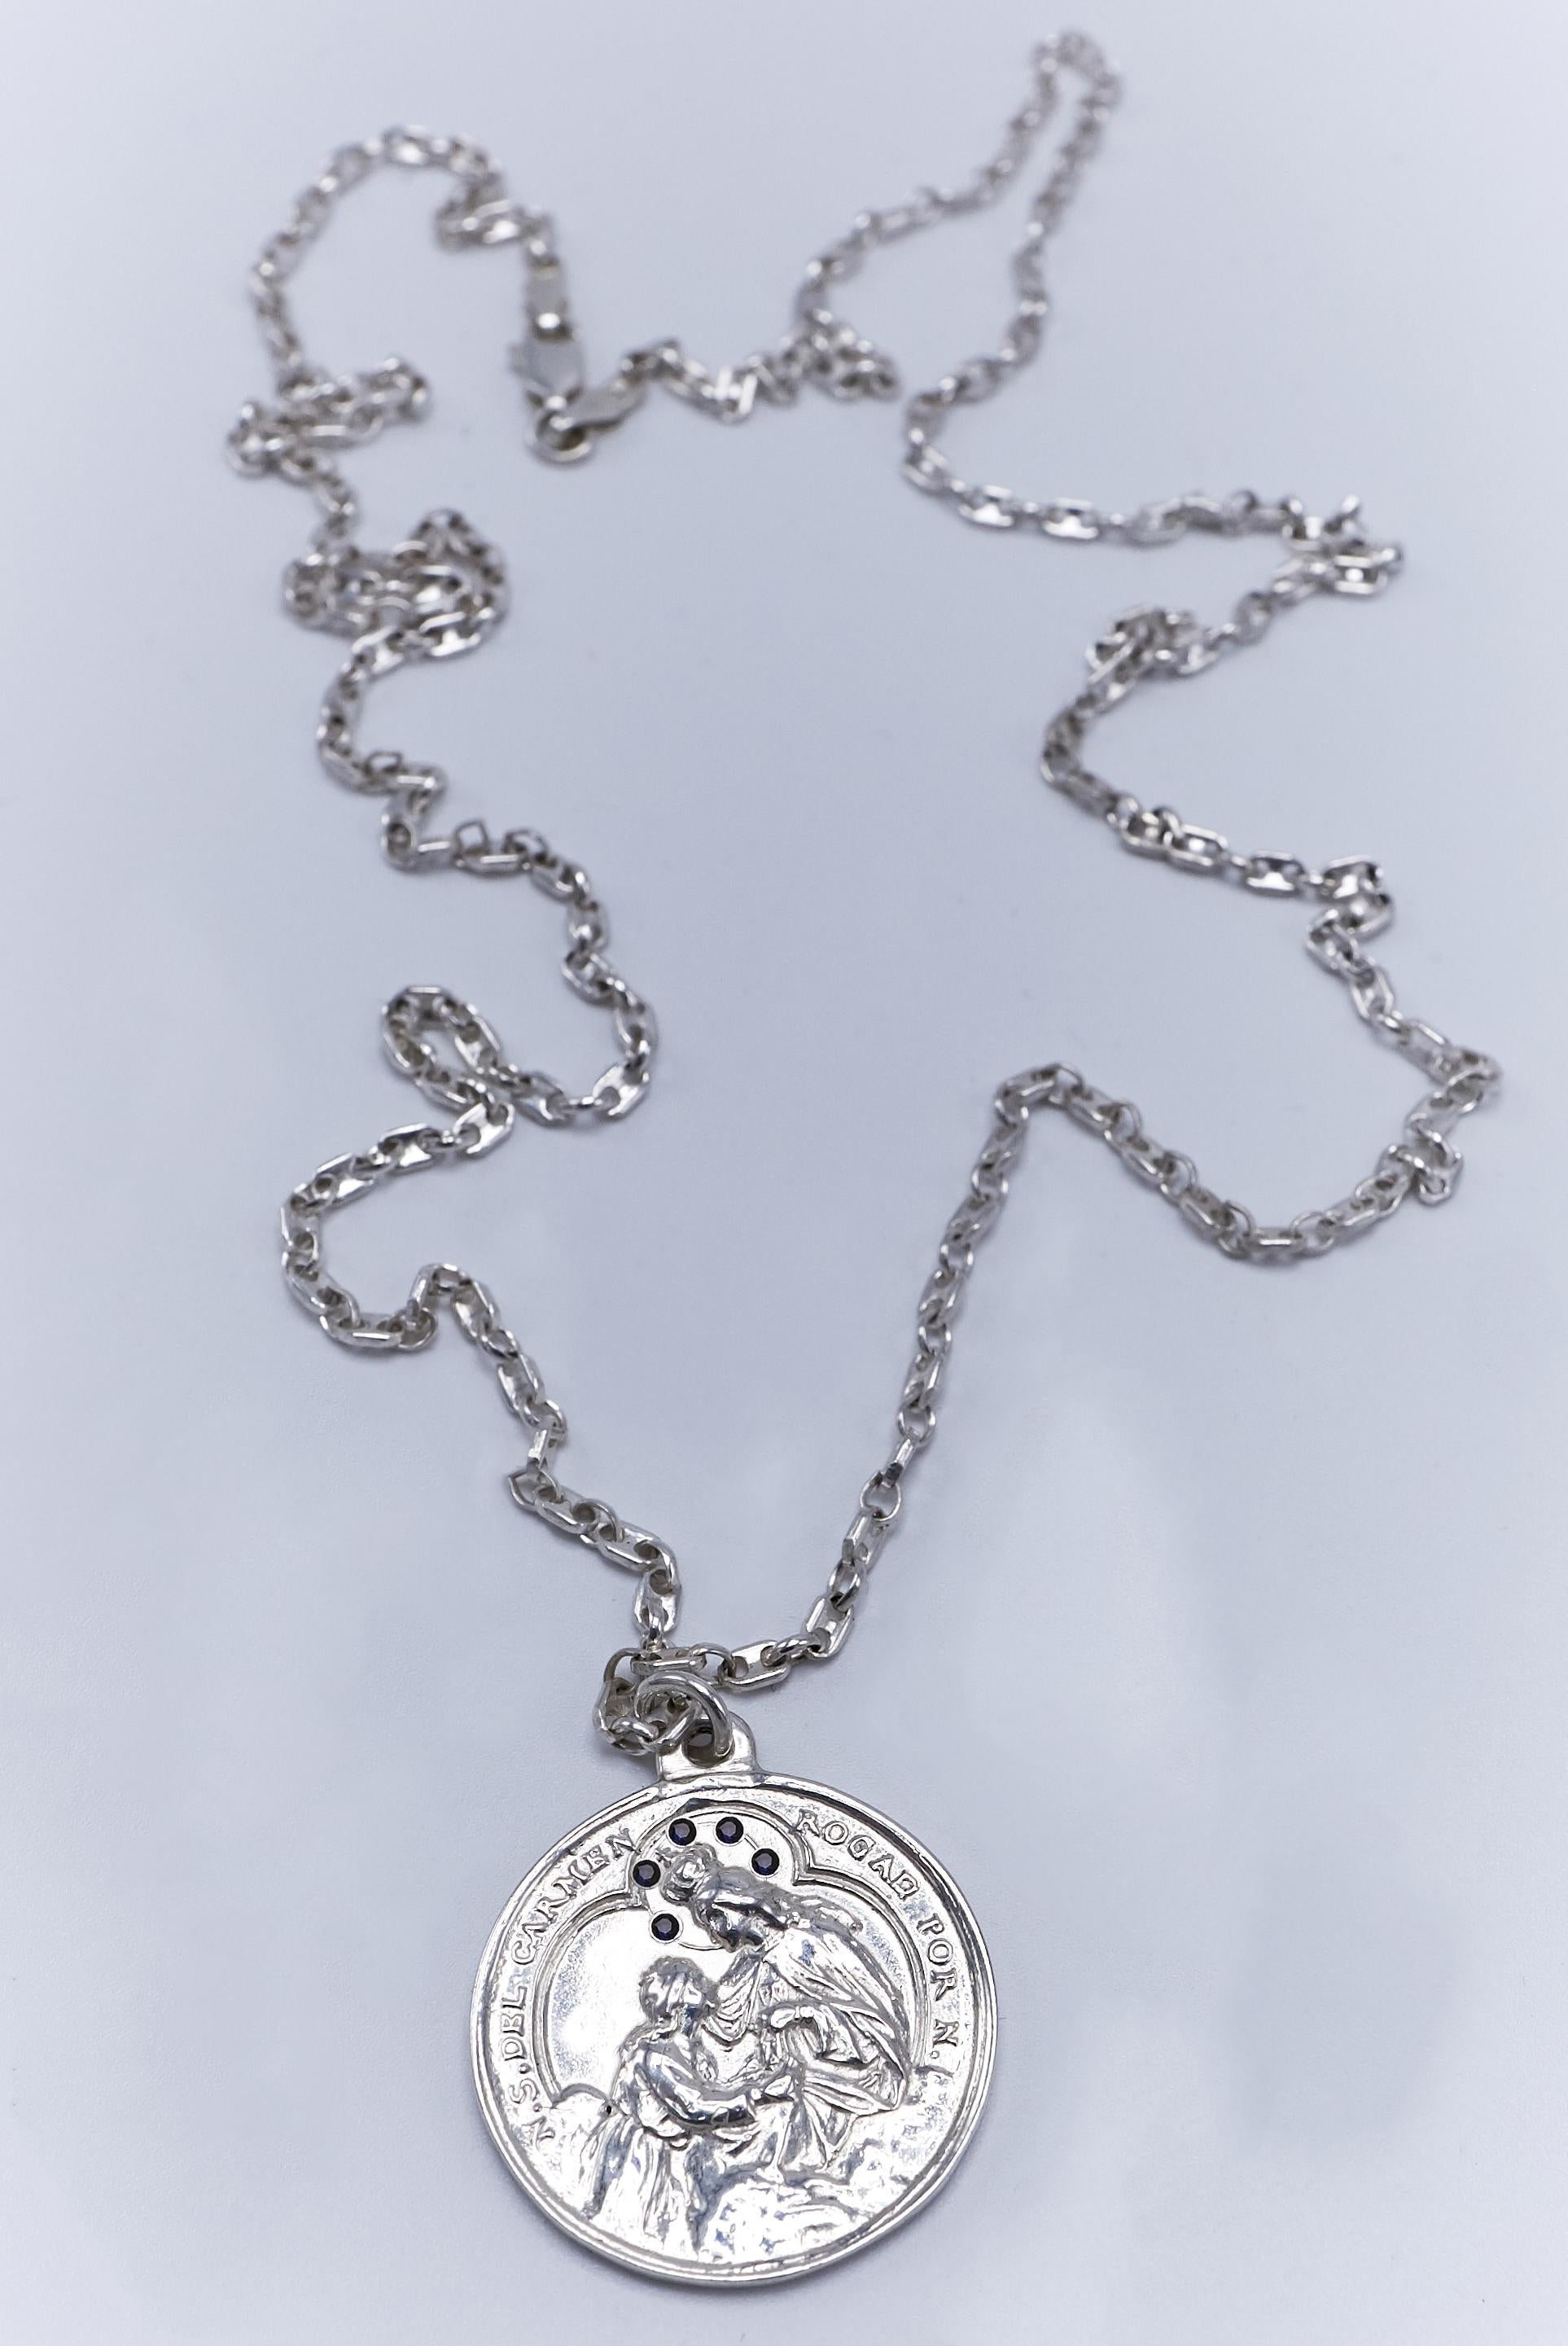 Brilliant Cut Medal Chain Necklace Miraculous Virgin Mary Black Diamond Silver J Dauphin For Sale